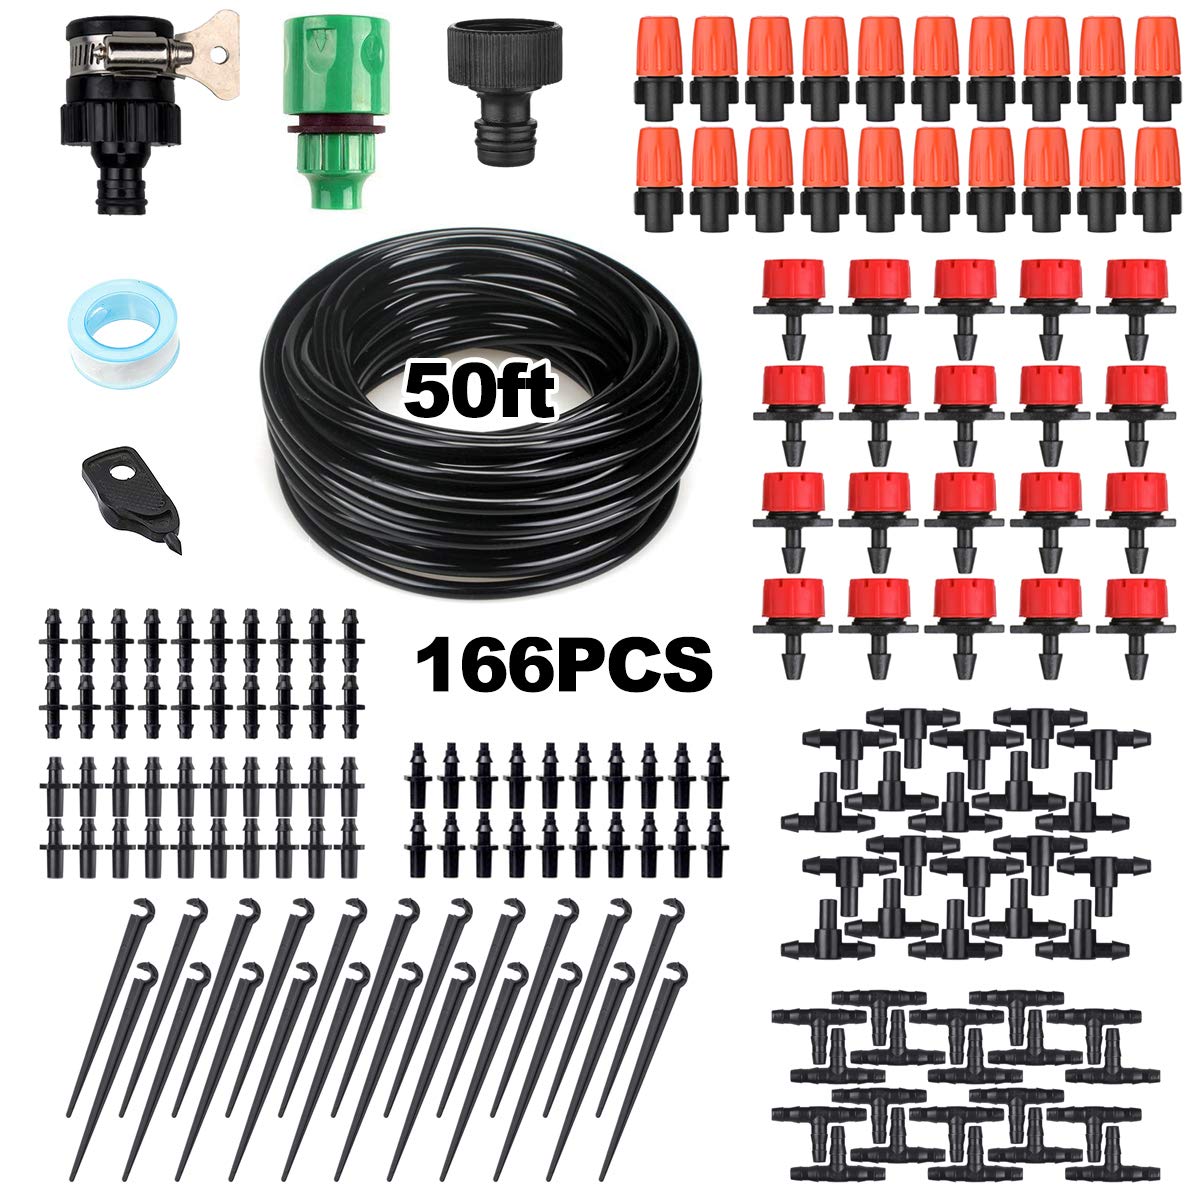 166Pcs-50ft-15m-Automatic-Drip-Irrigation-Plant-Watering-Kit-Mist-Cooling-Irrigation-System-for-Gree-1685781